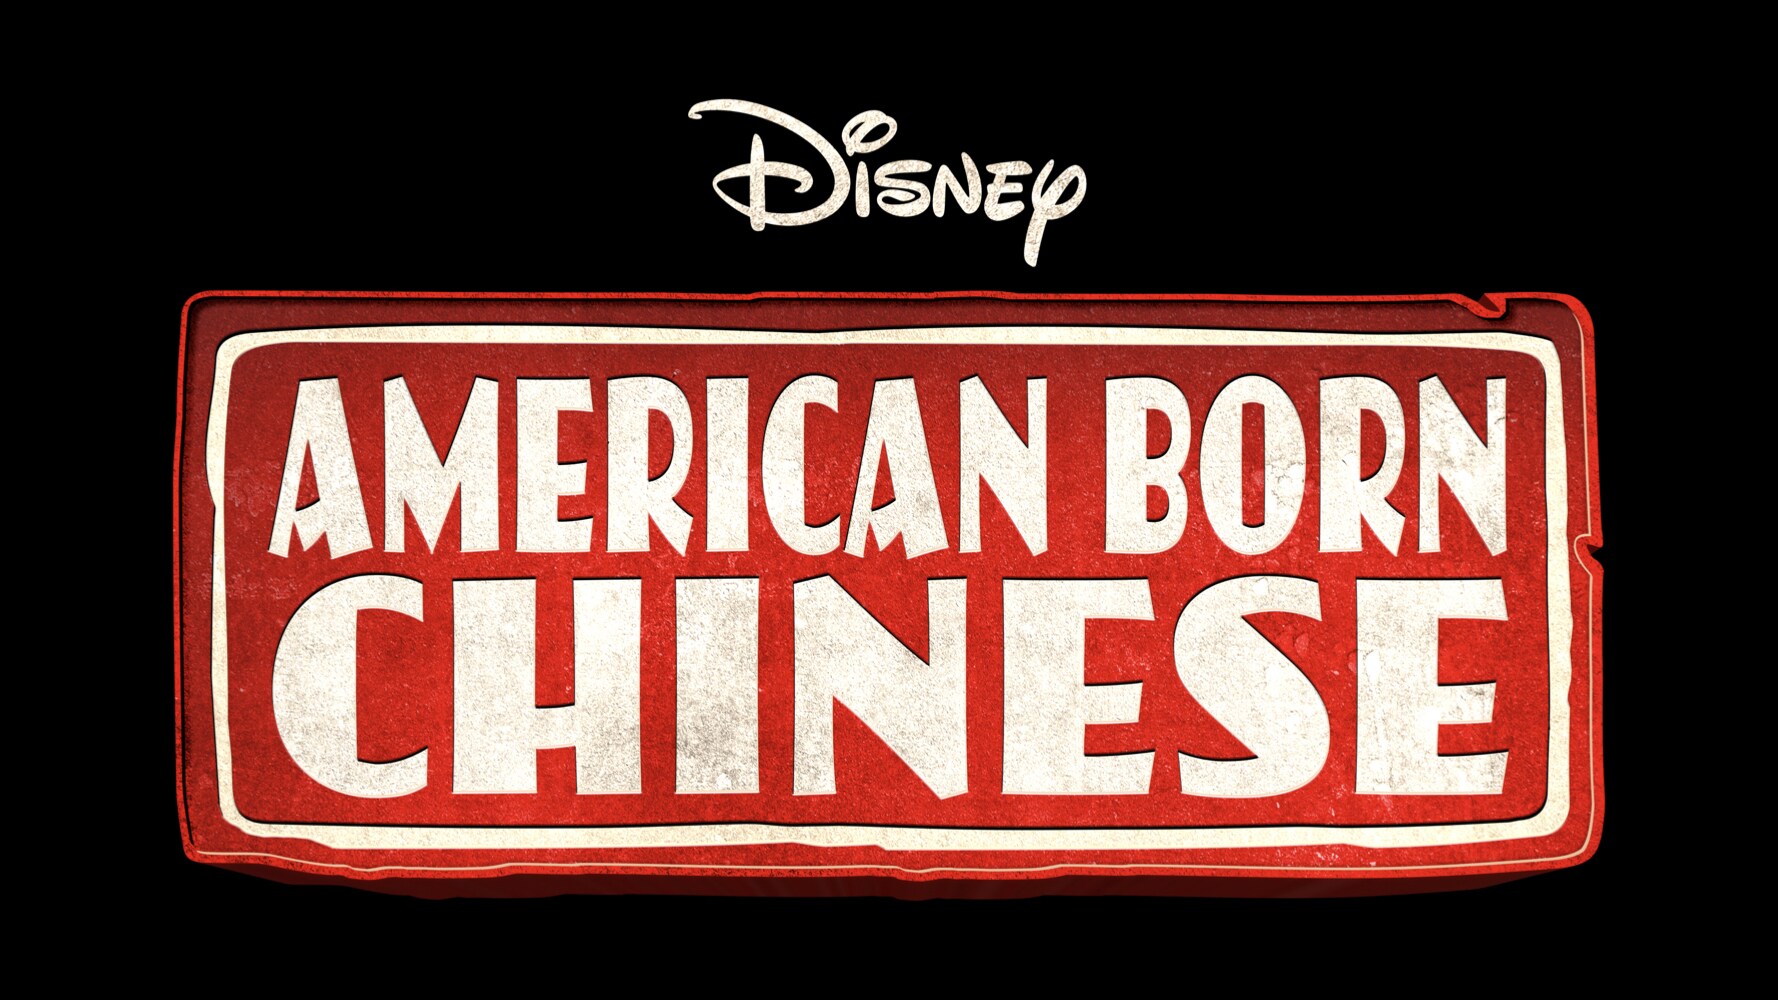 Iconic Fashion Designers Prabal Gurung And Phillip Lim Team Up For The Disney+ Original Series "American Born Chinese"